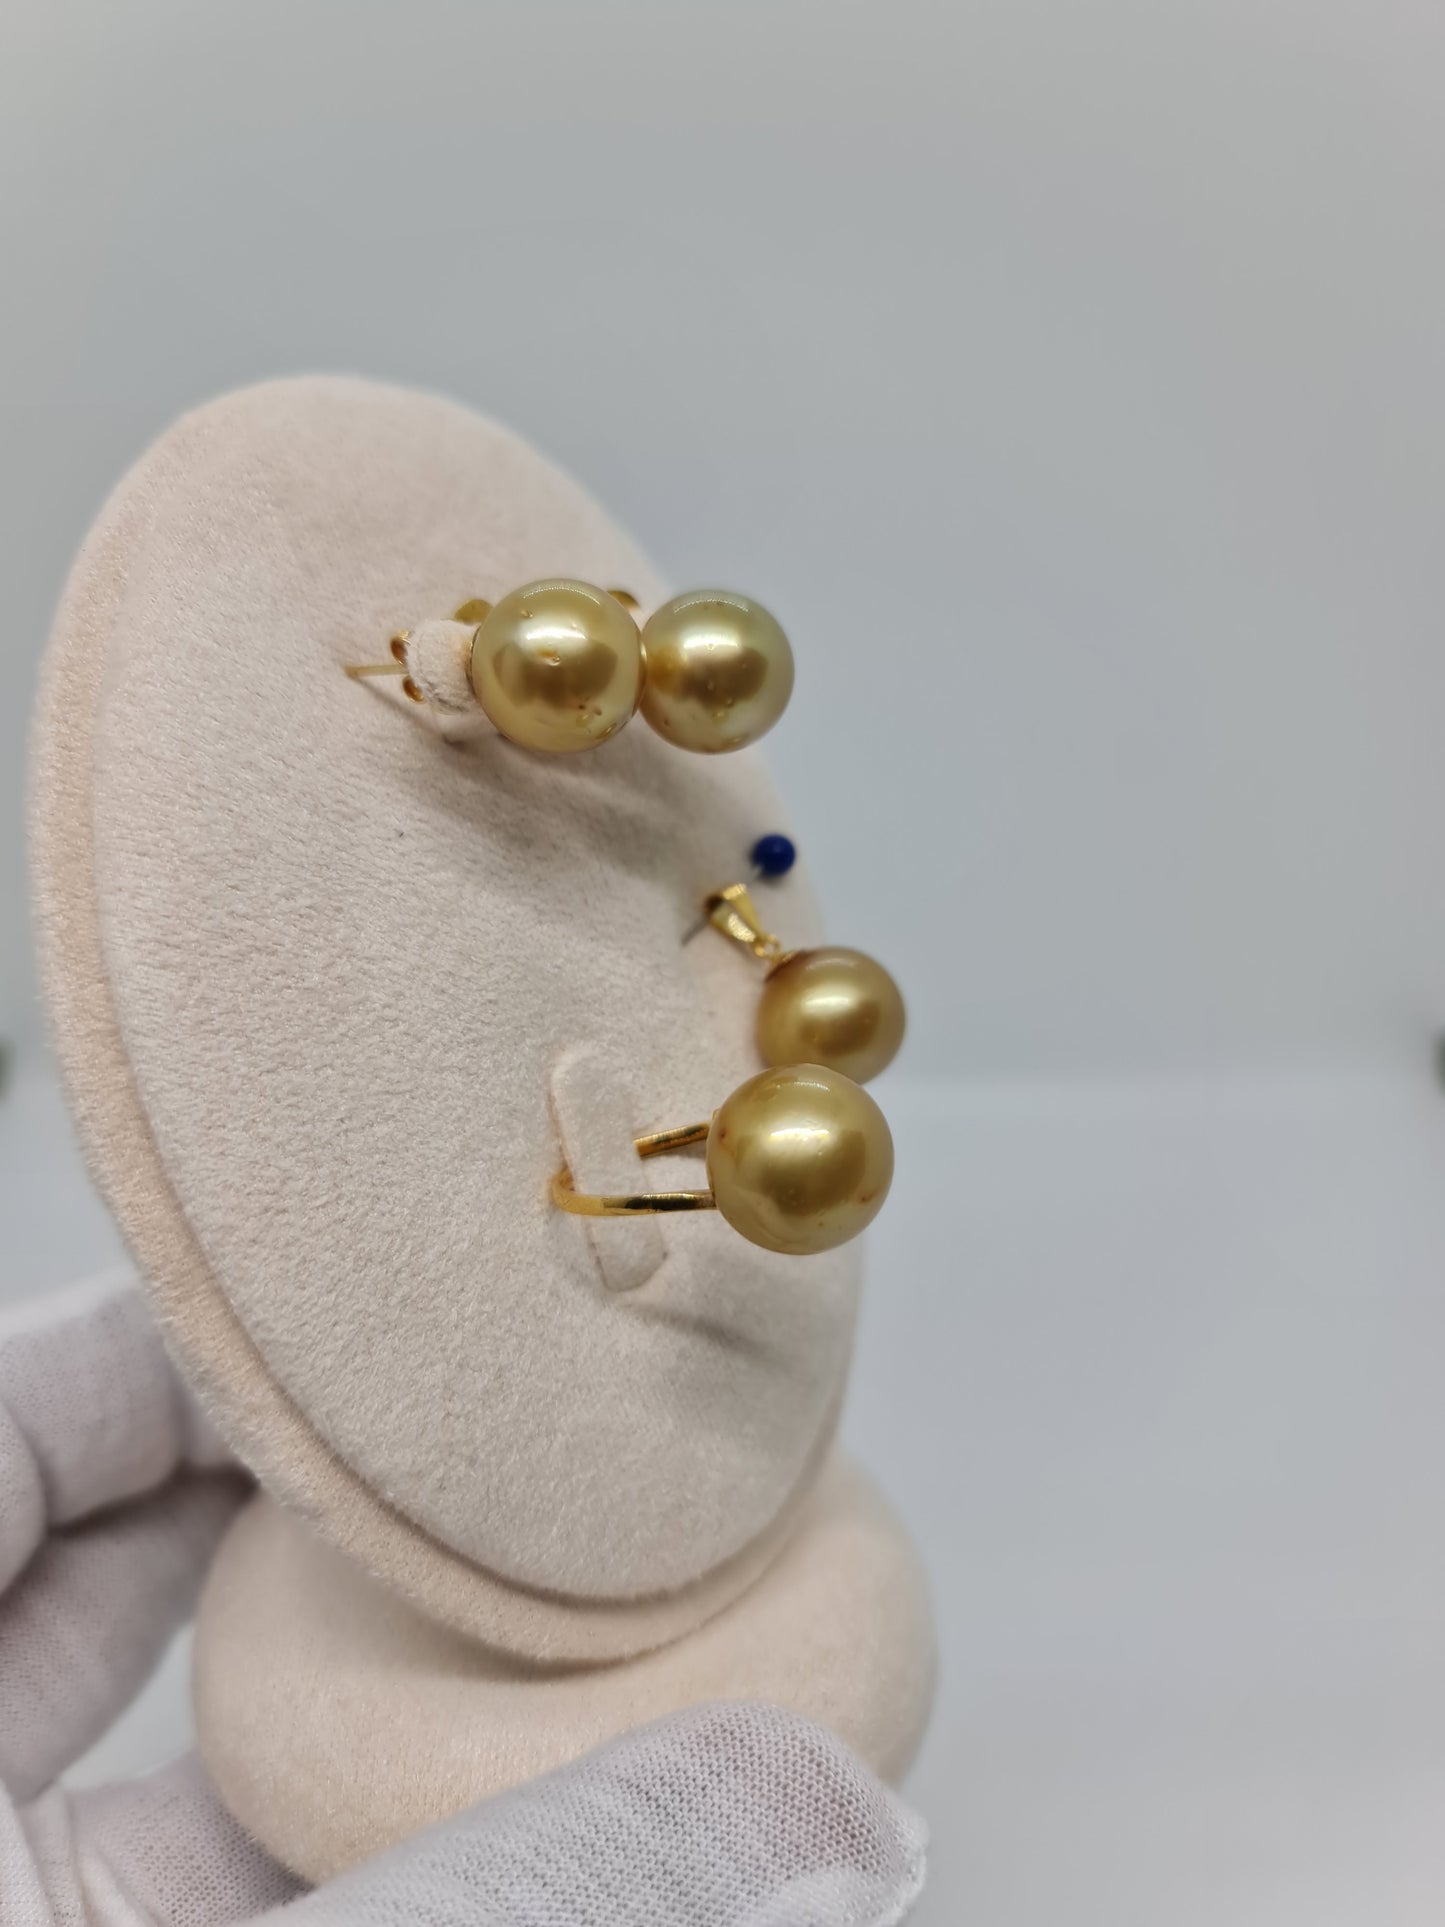 12.7mm to 13mm Golden South Sea Pearls Set in 14K Gold